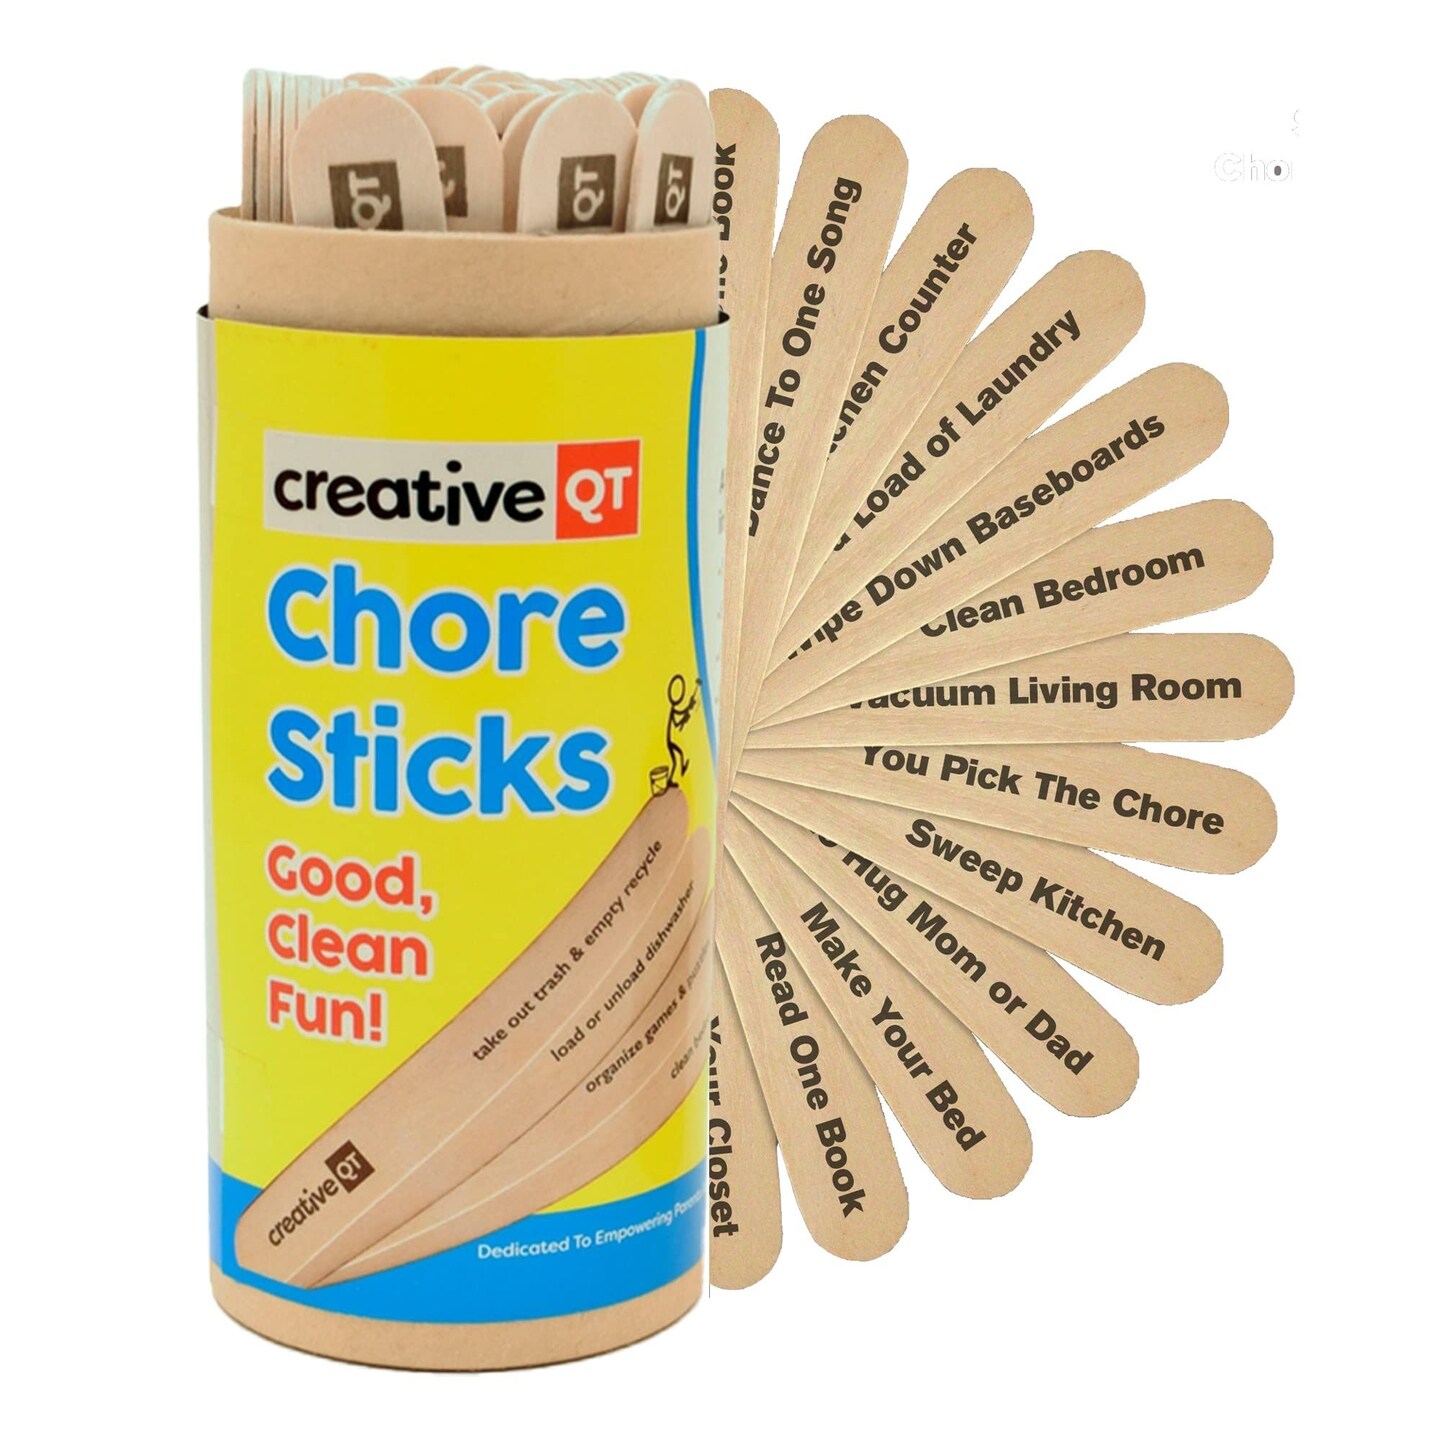 Chore Sticks for Kids - Make Chores a Game - Interactive Family Activity by Creative QT - Combine Responsibility with Rewards - A Fun Alternative to a Chore Chart